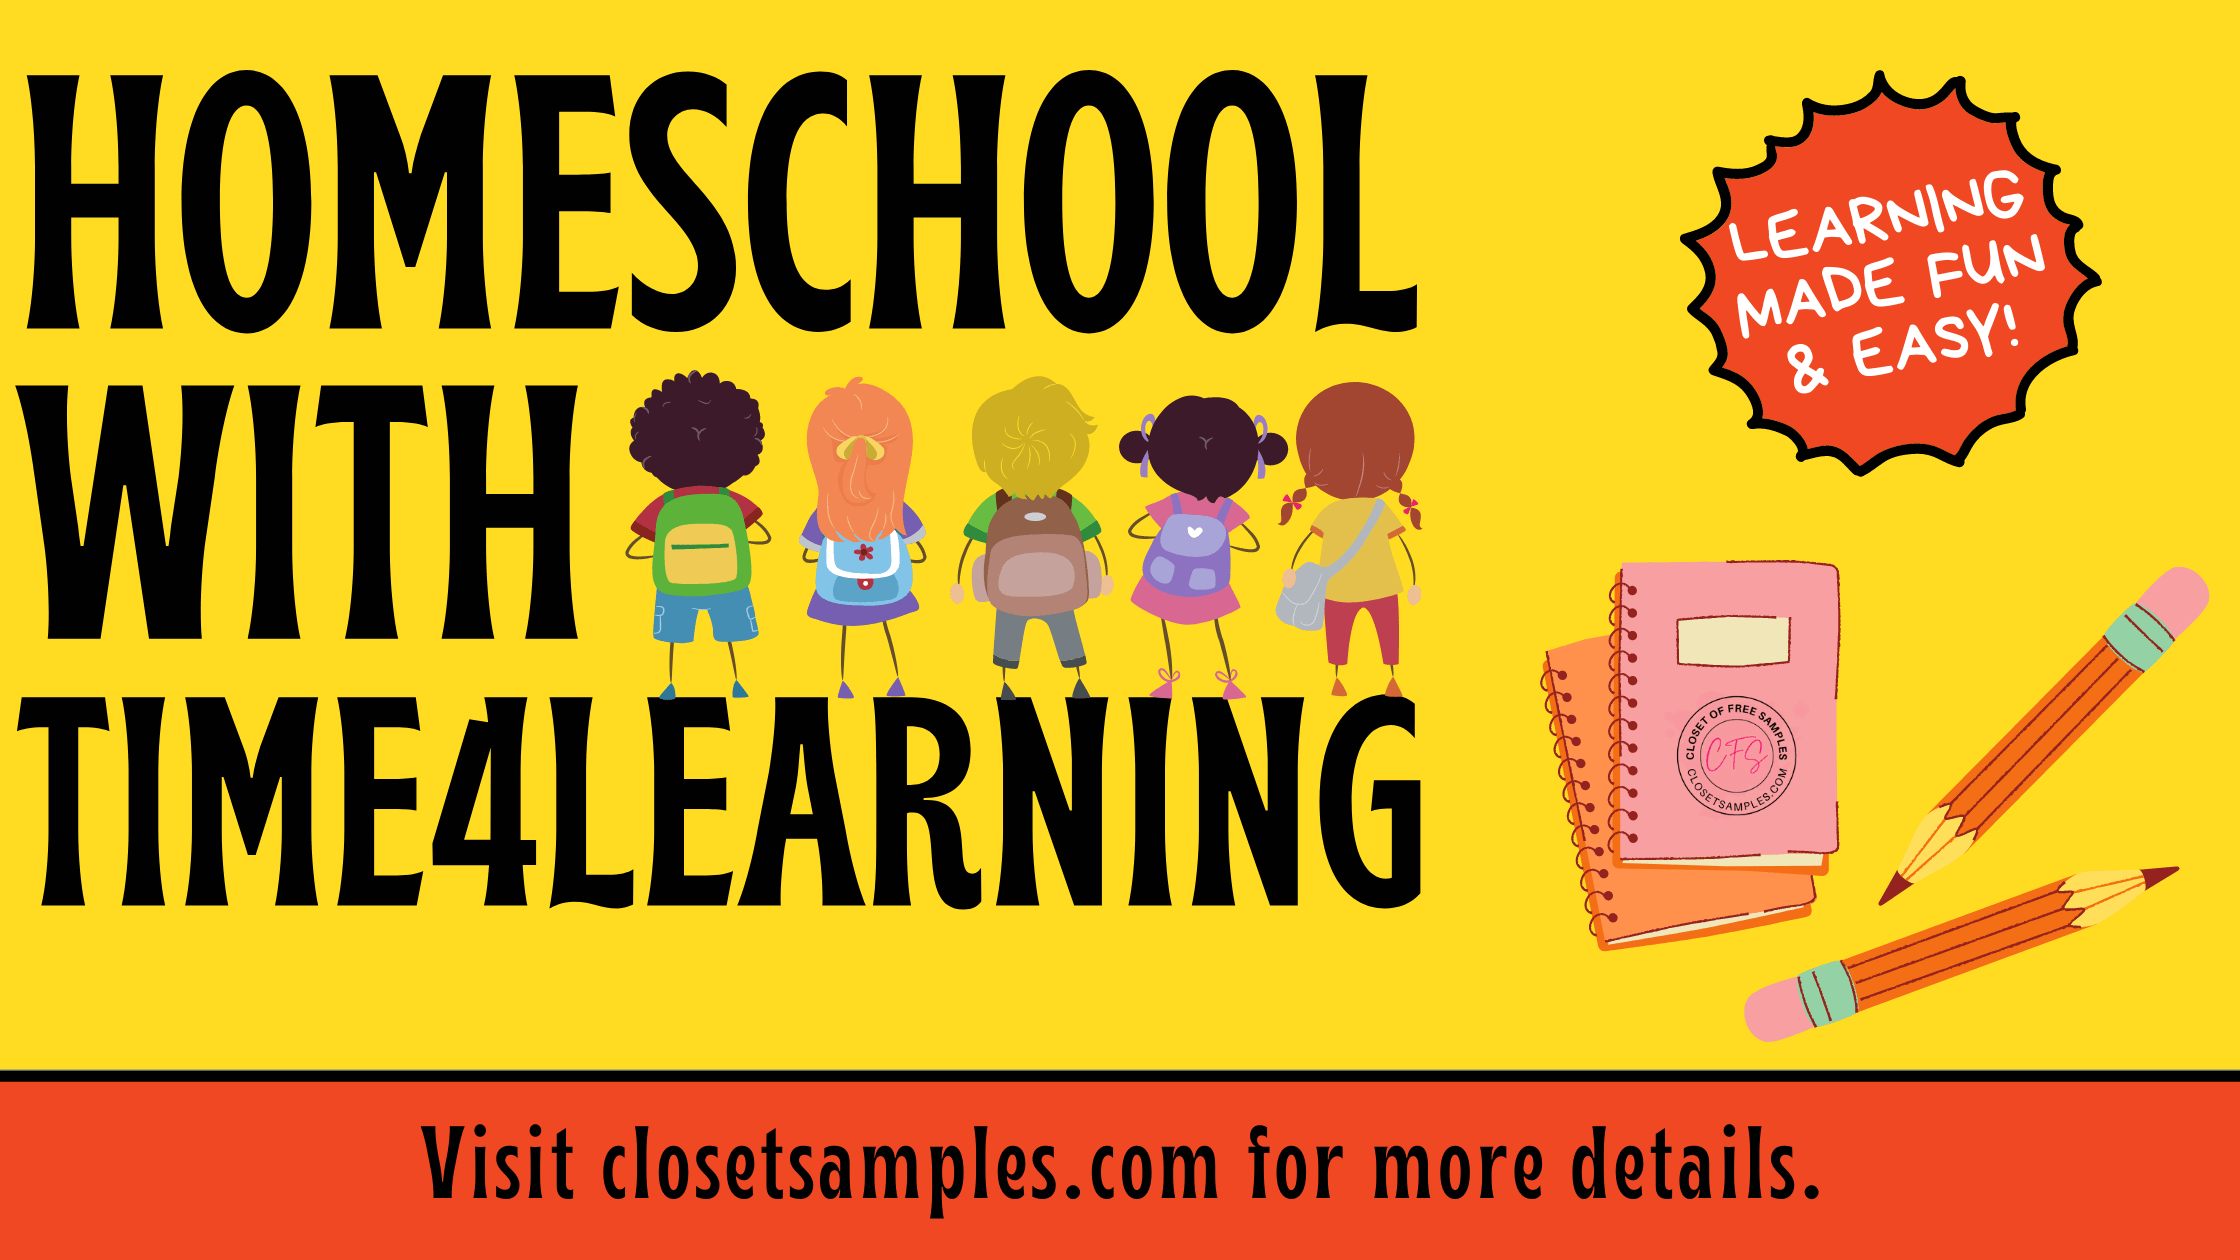 Homeschool with Time4Learning!